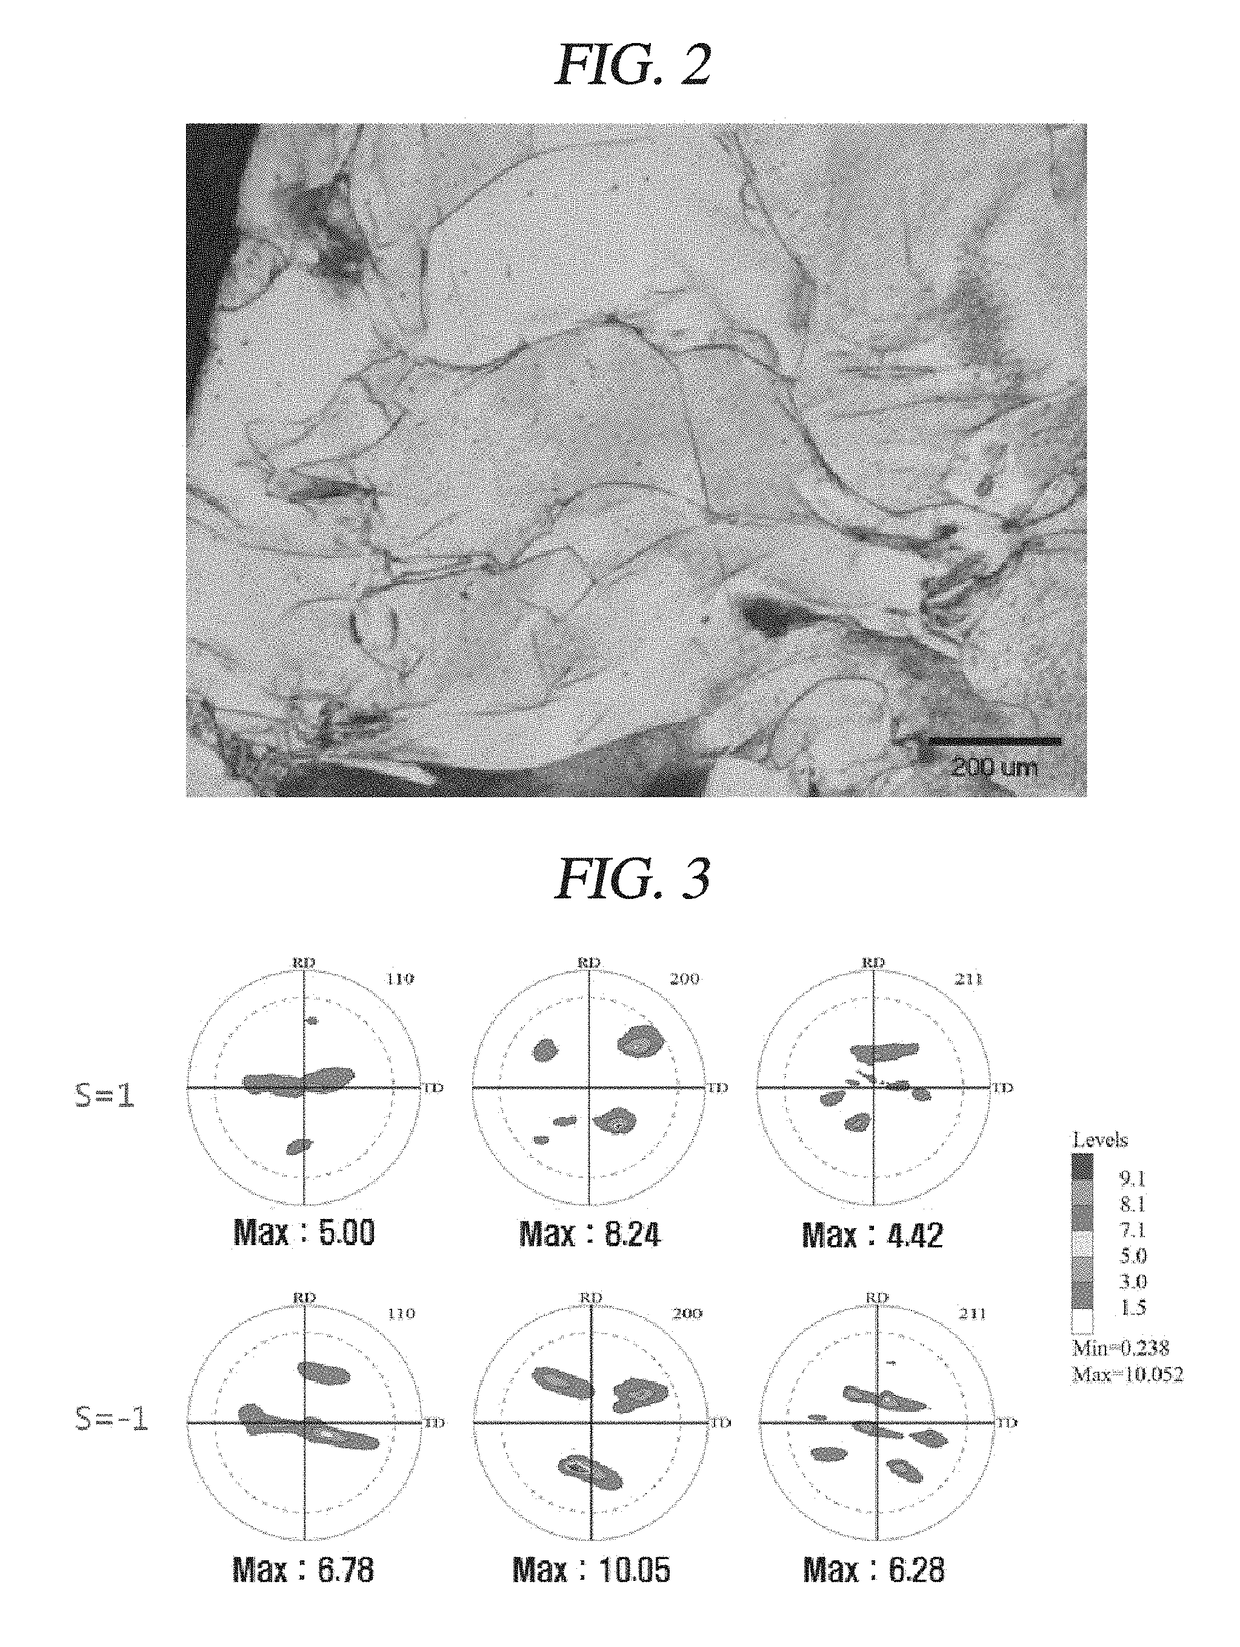 Method for controlling microstructure and texture of tantalum